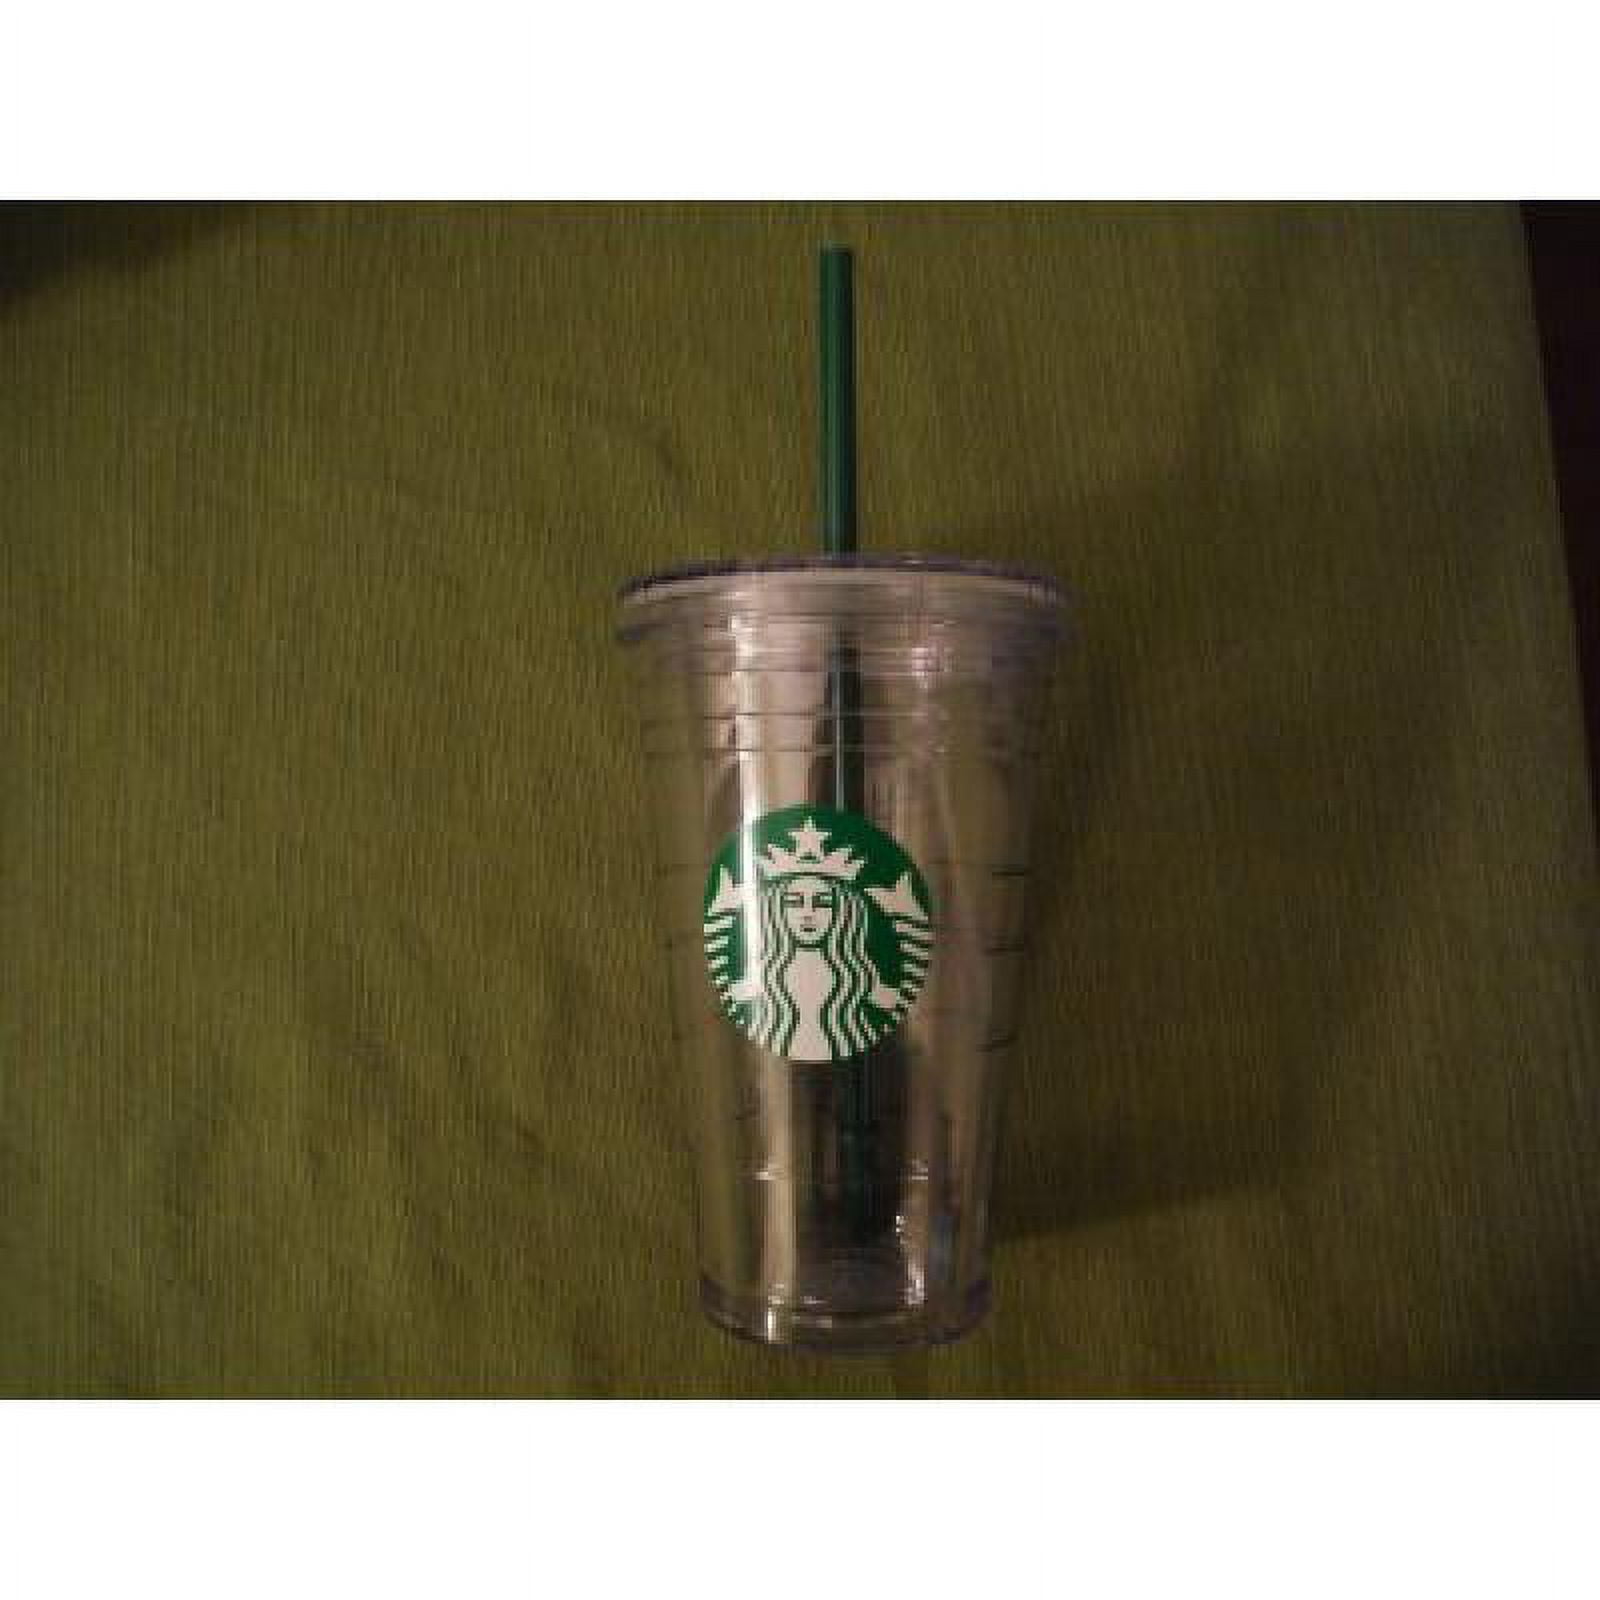 Personalised Cold Cup With Straw, Starbucks Inspired, Party